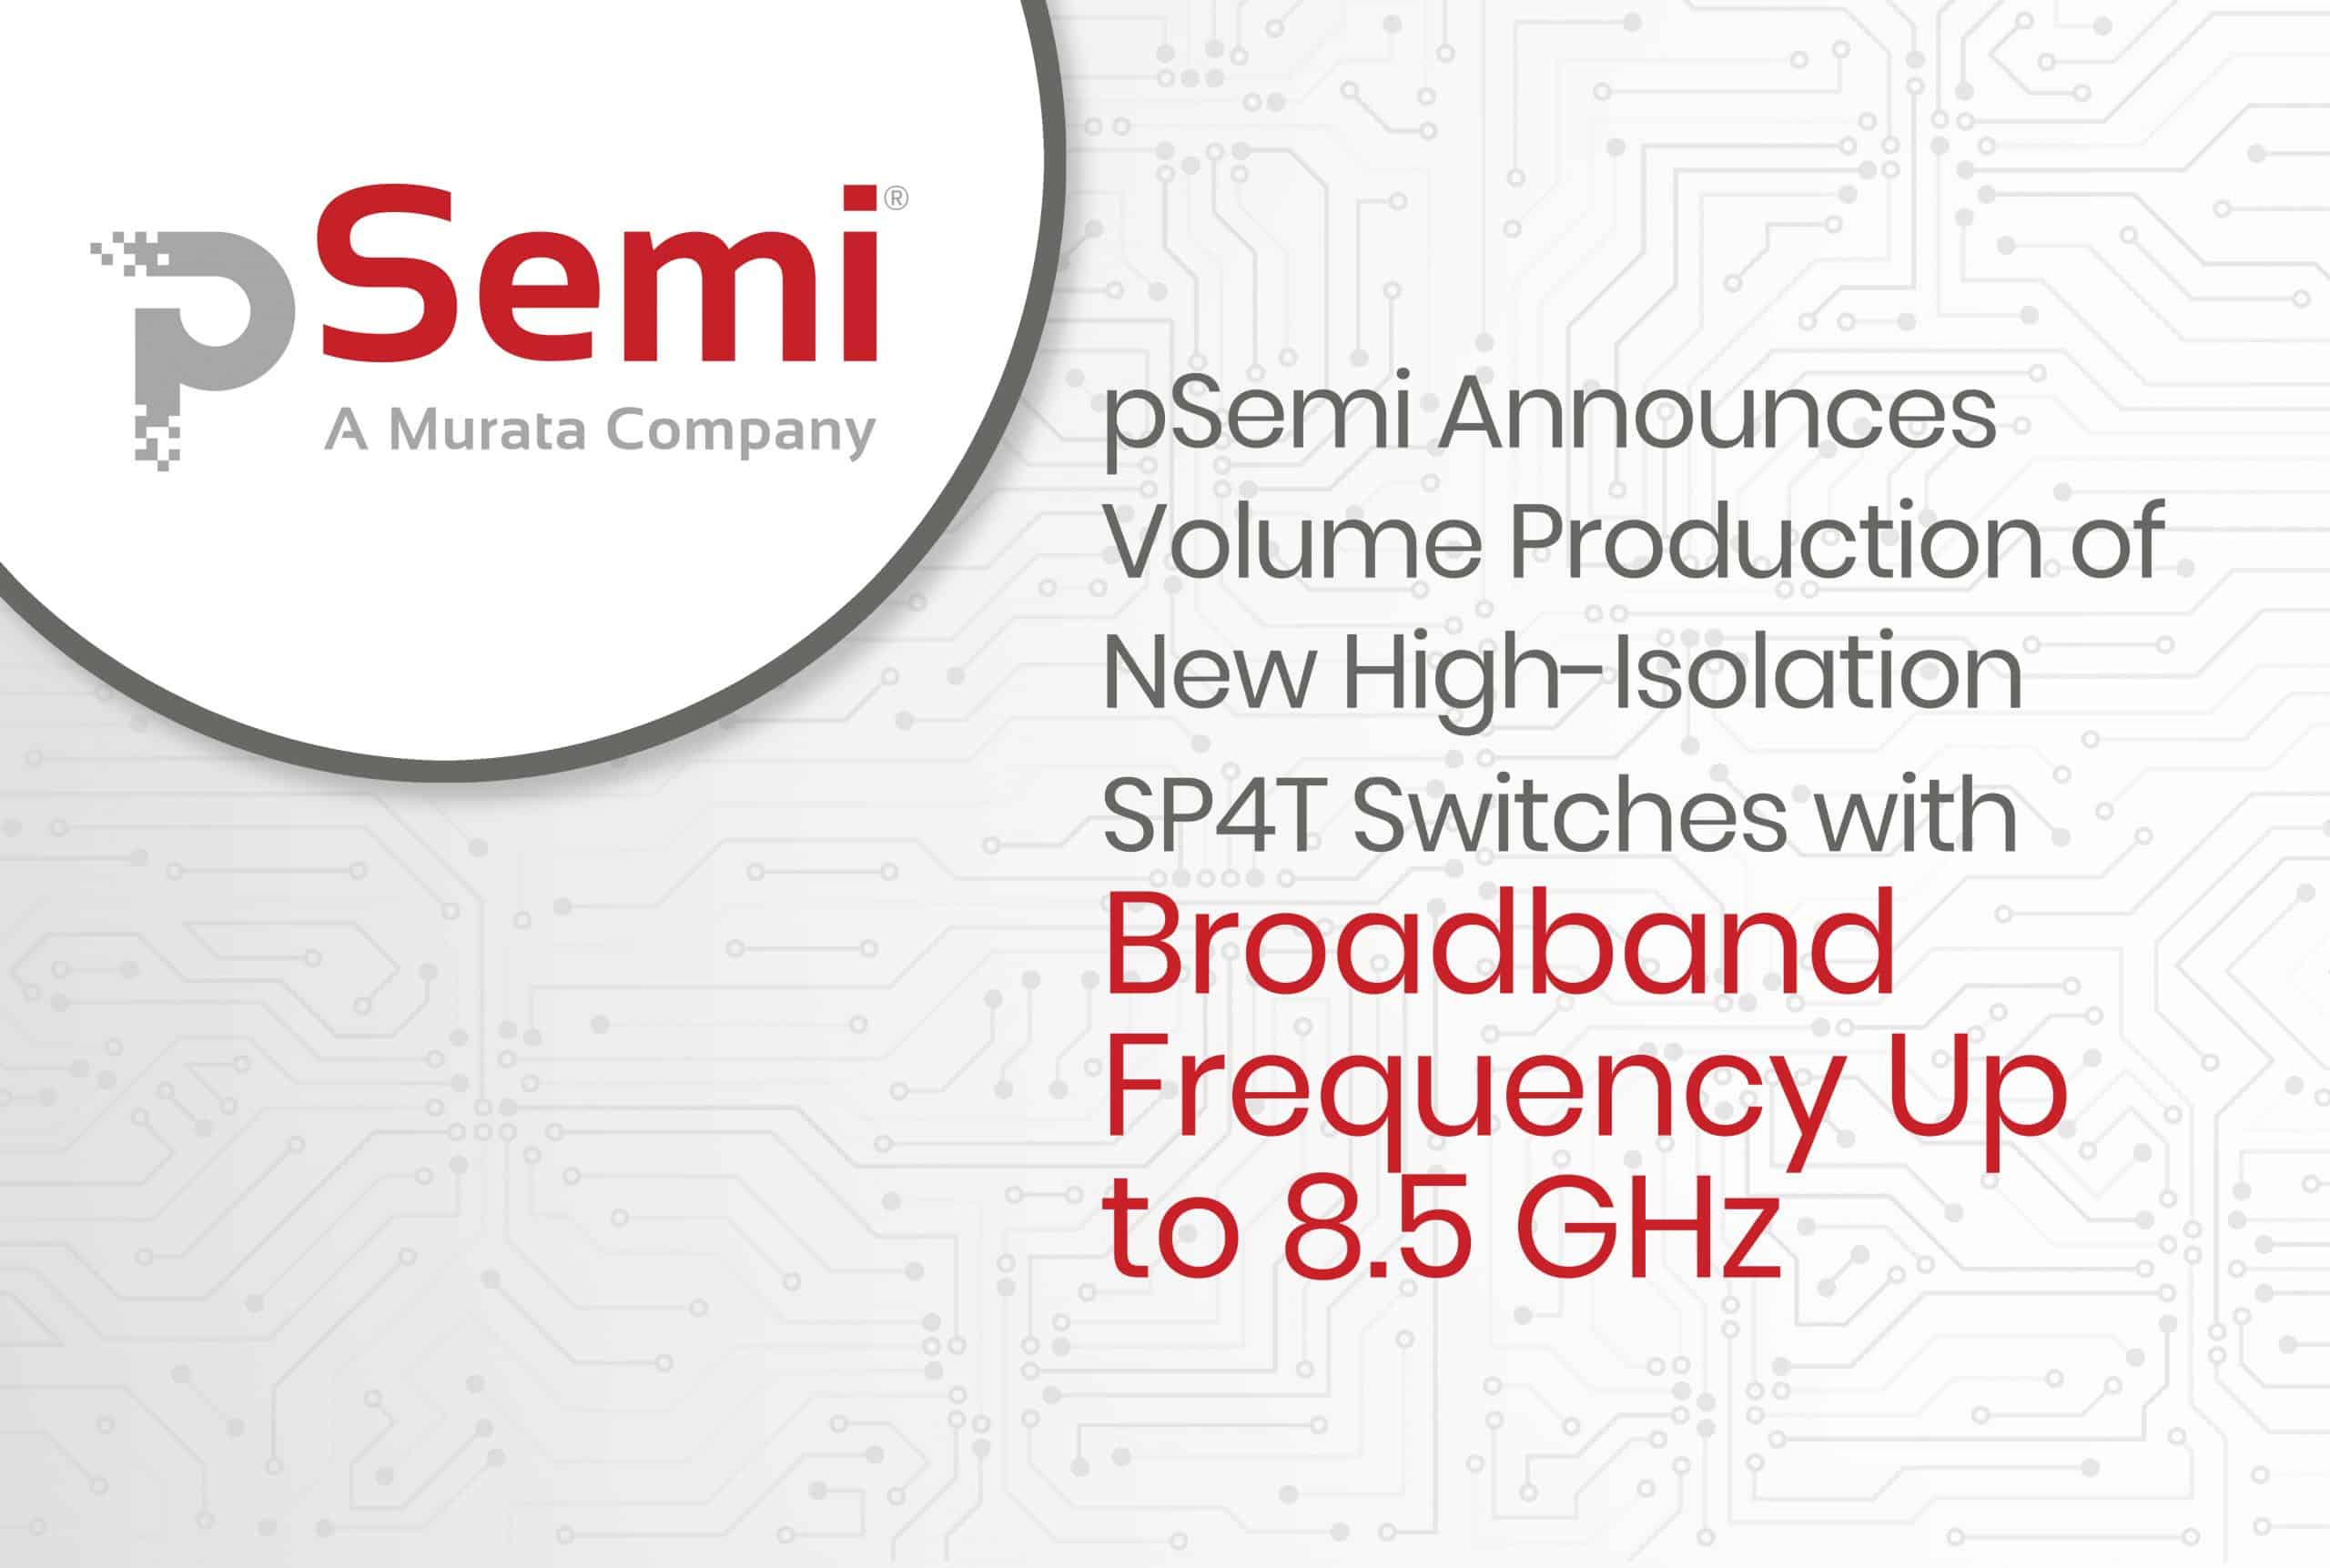 pSemi Announces Volume Production of its New High-Isolation SP4T Switches